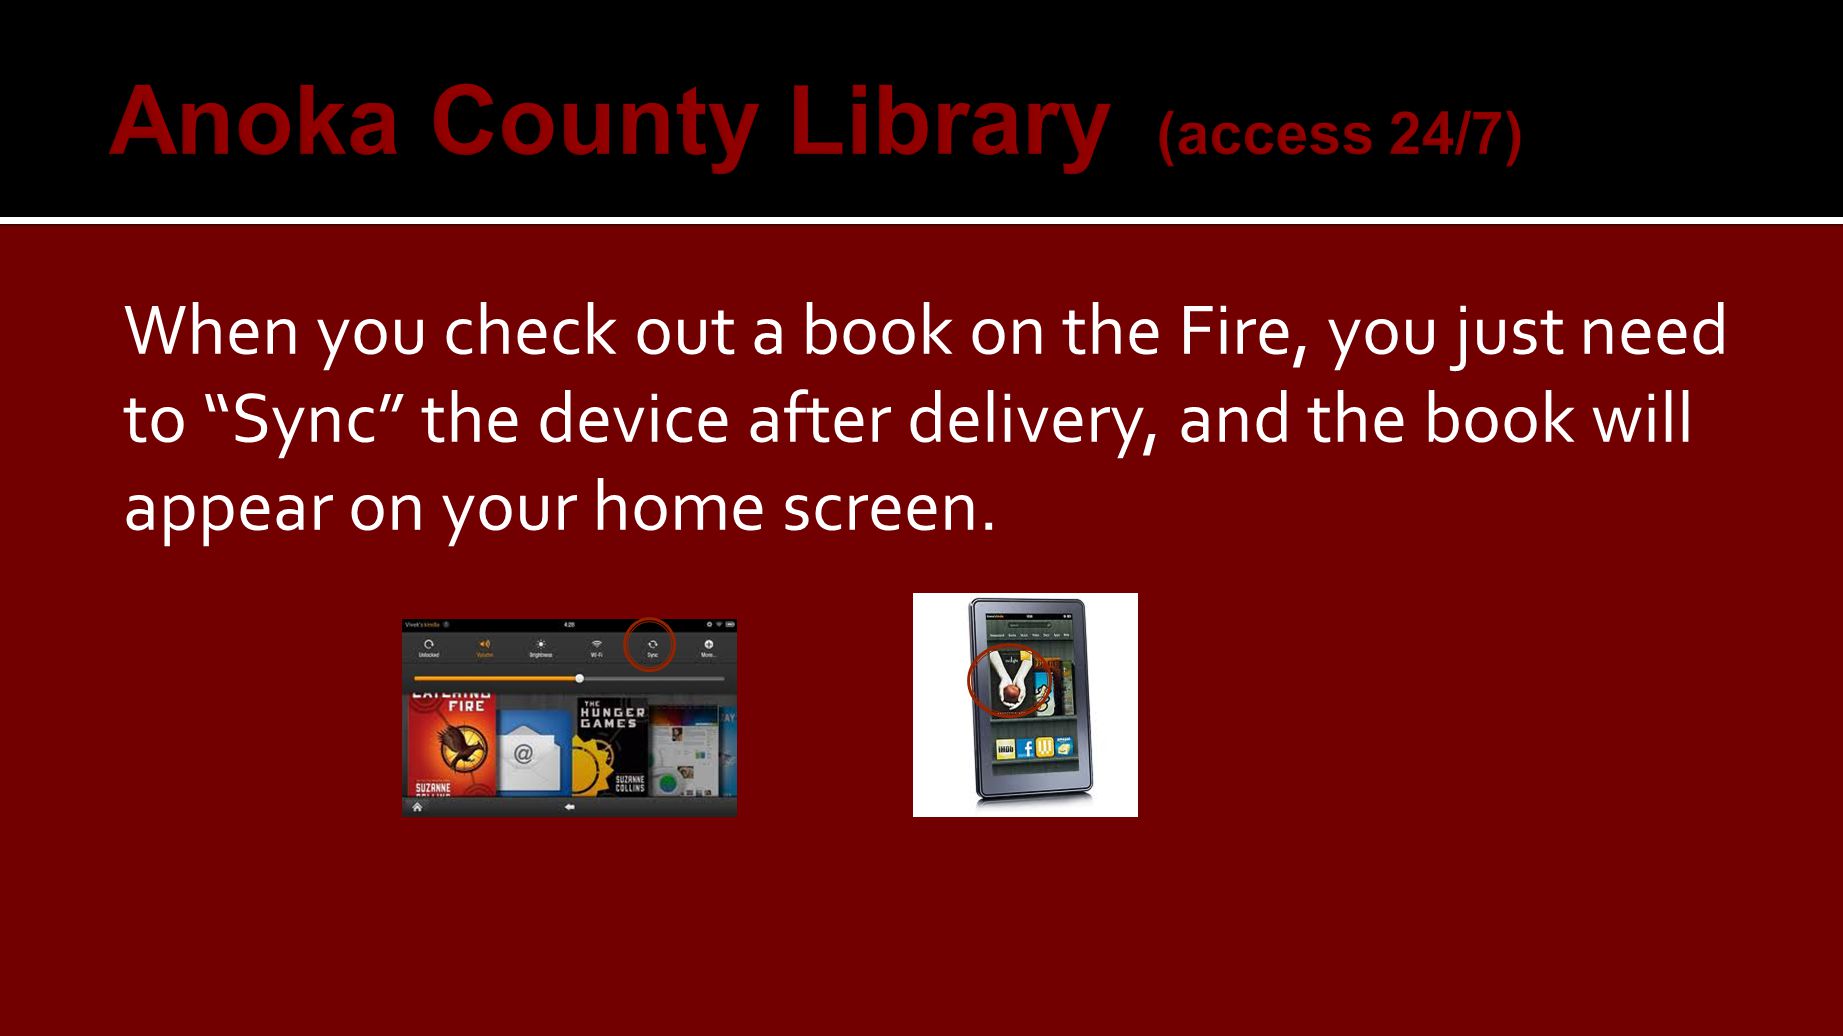 When you check out a book on the Fire, you just need to Sync the device after delivery, and the book will appear on your home screen.